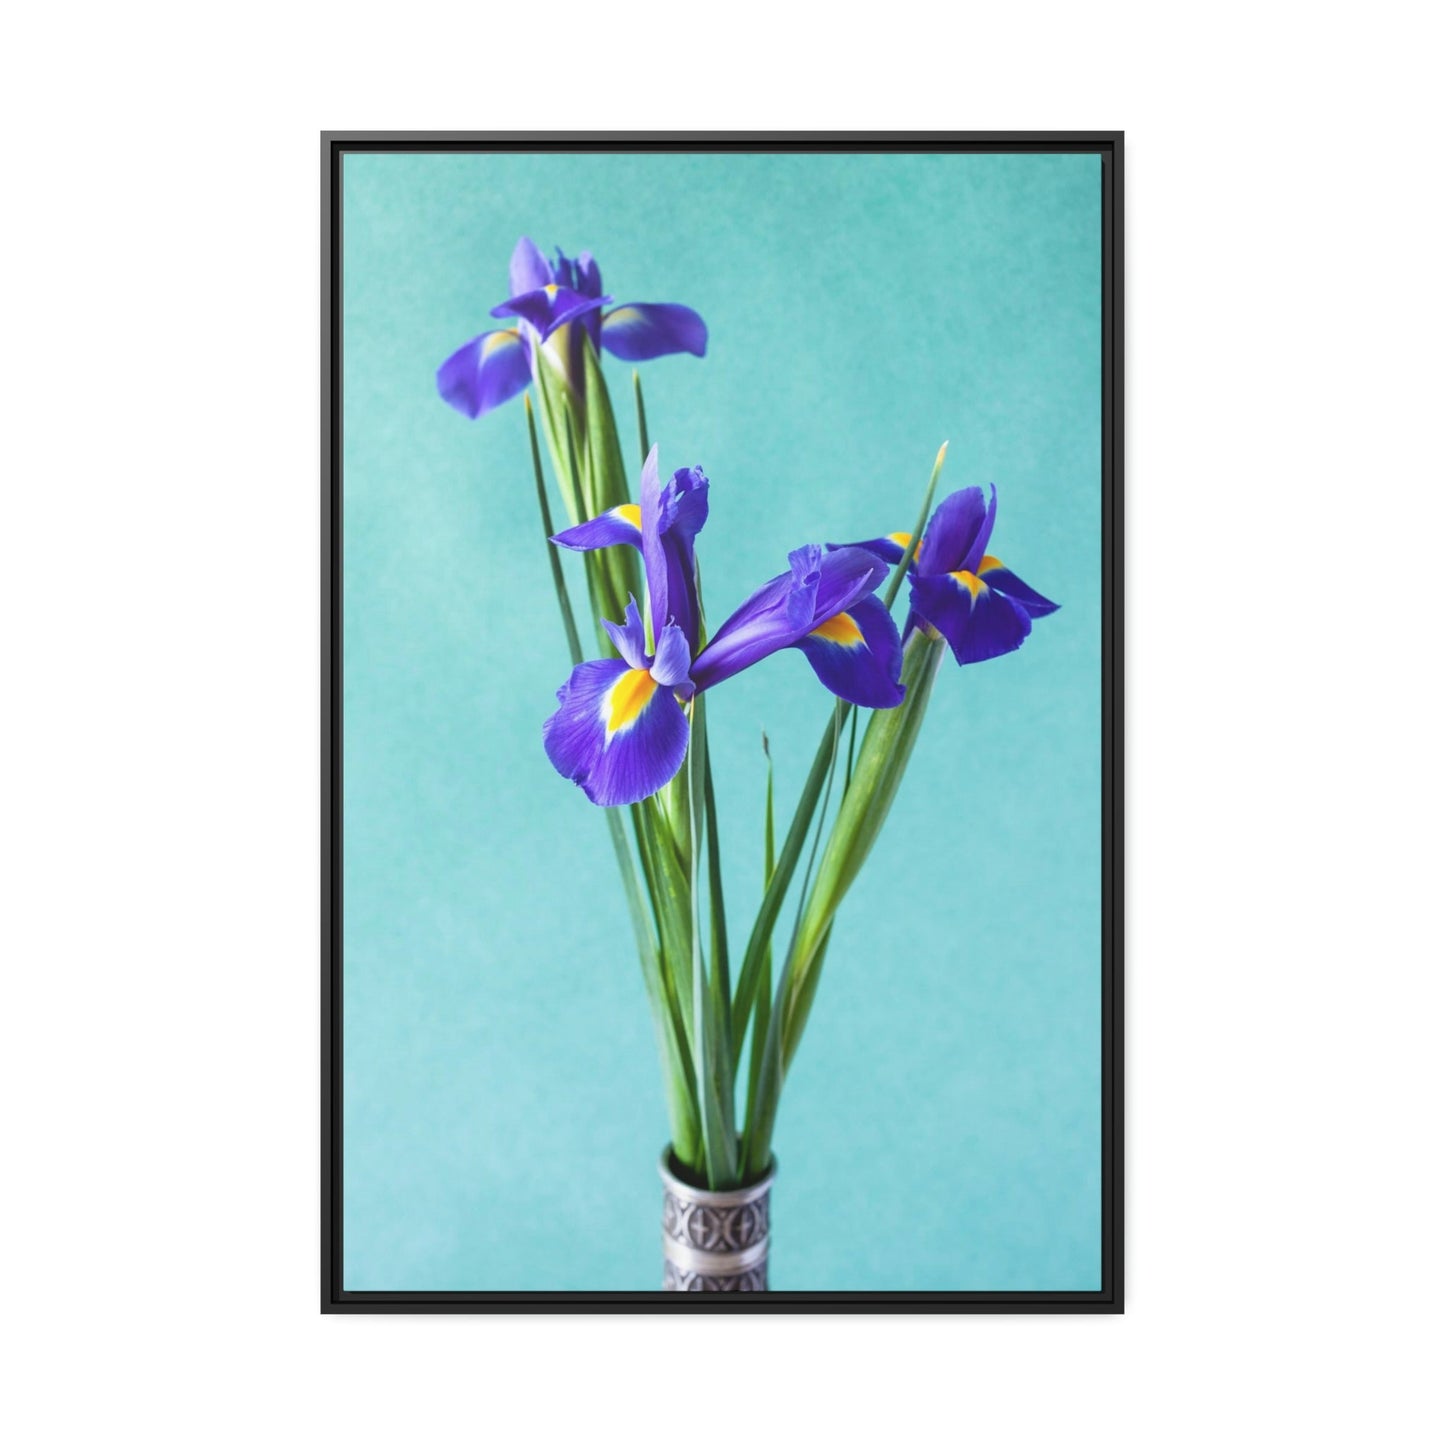 Iris Radiance: A Canvas of Bright and Bold Blossoms